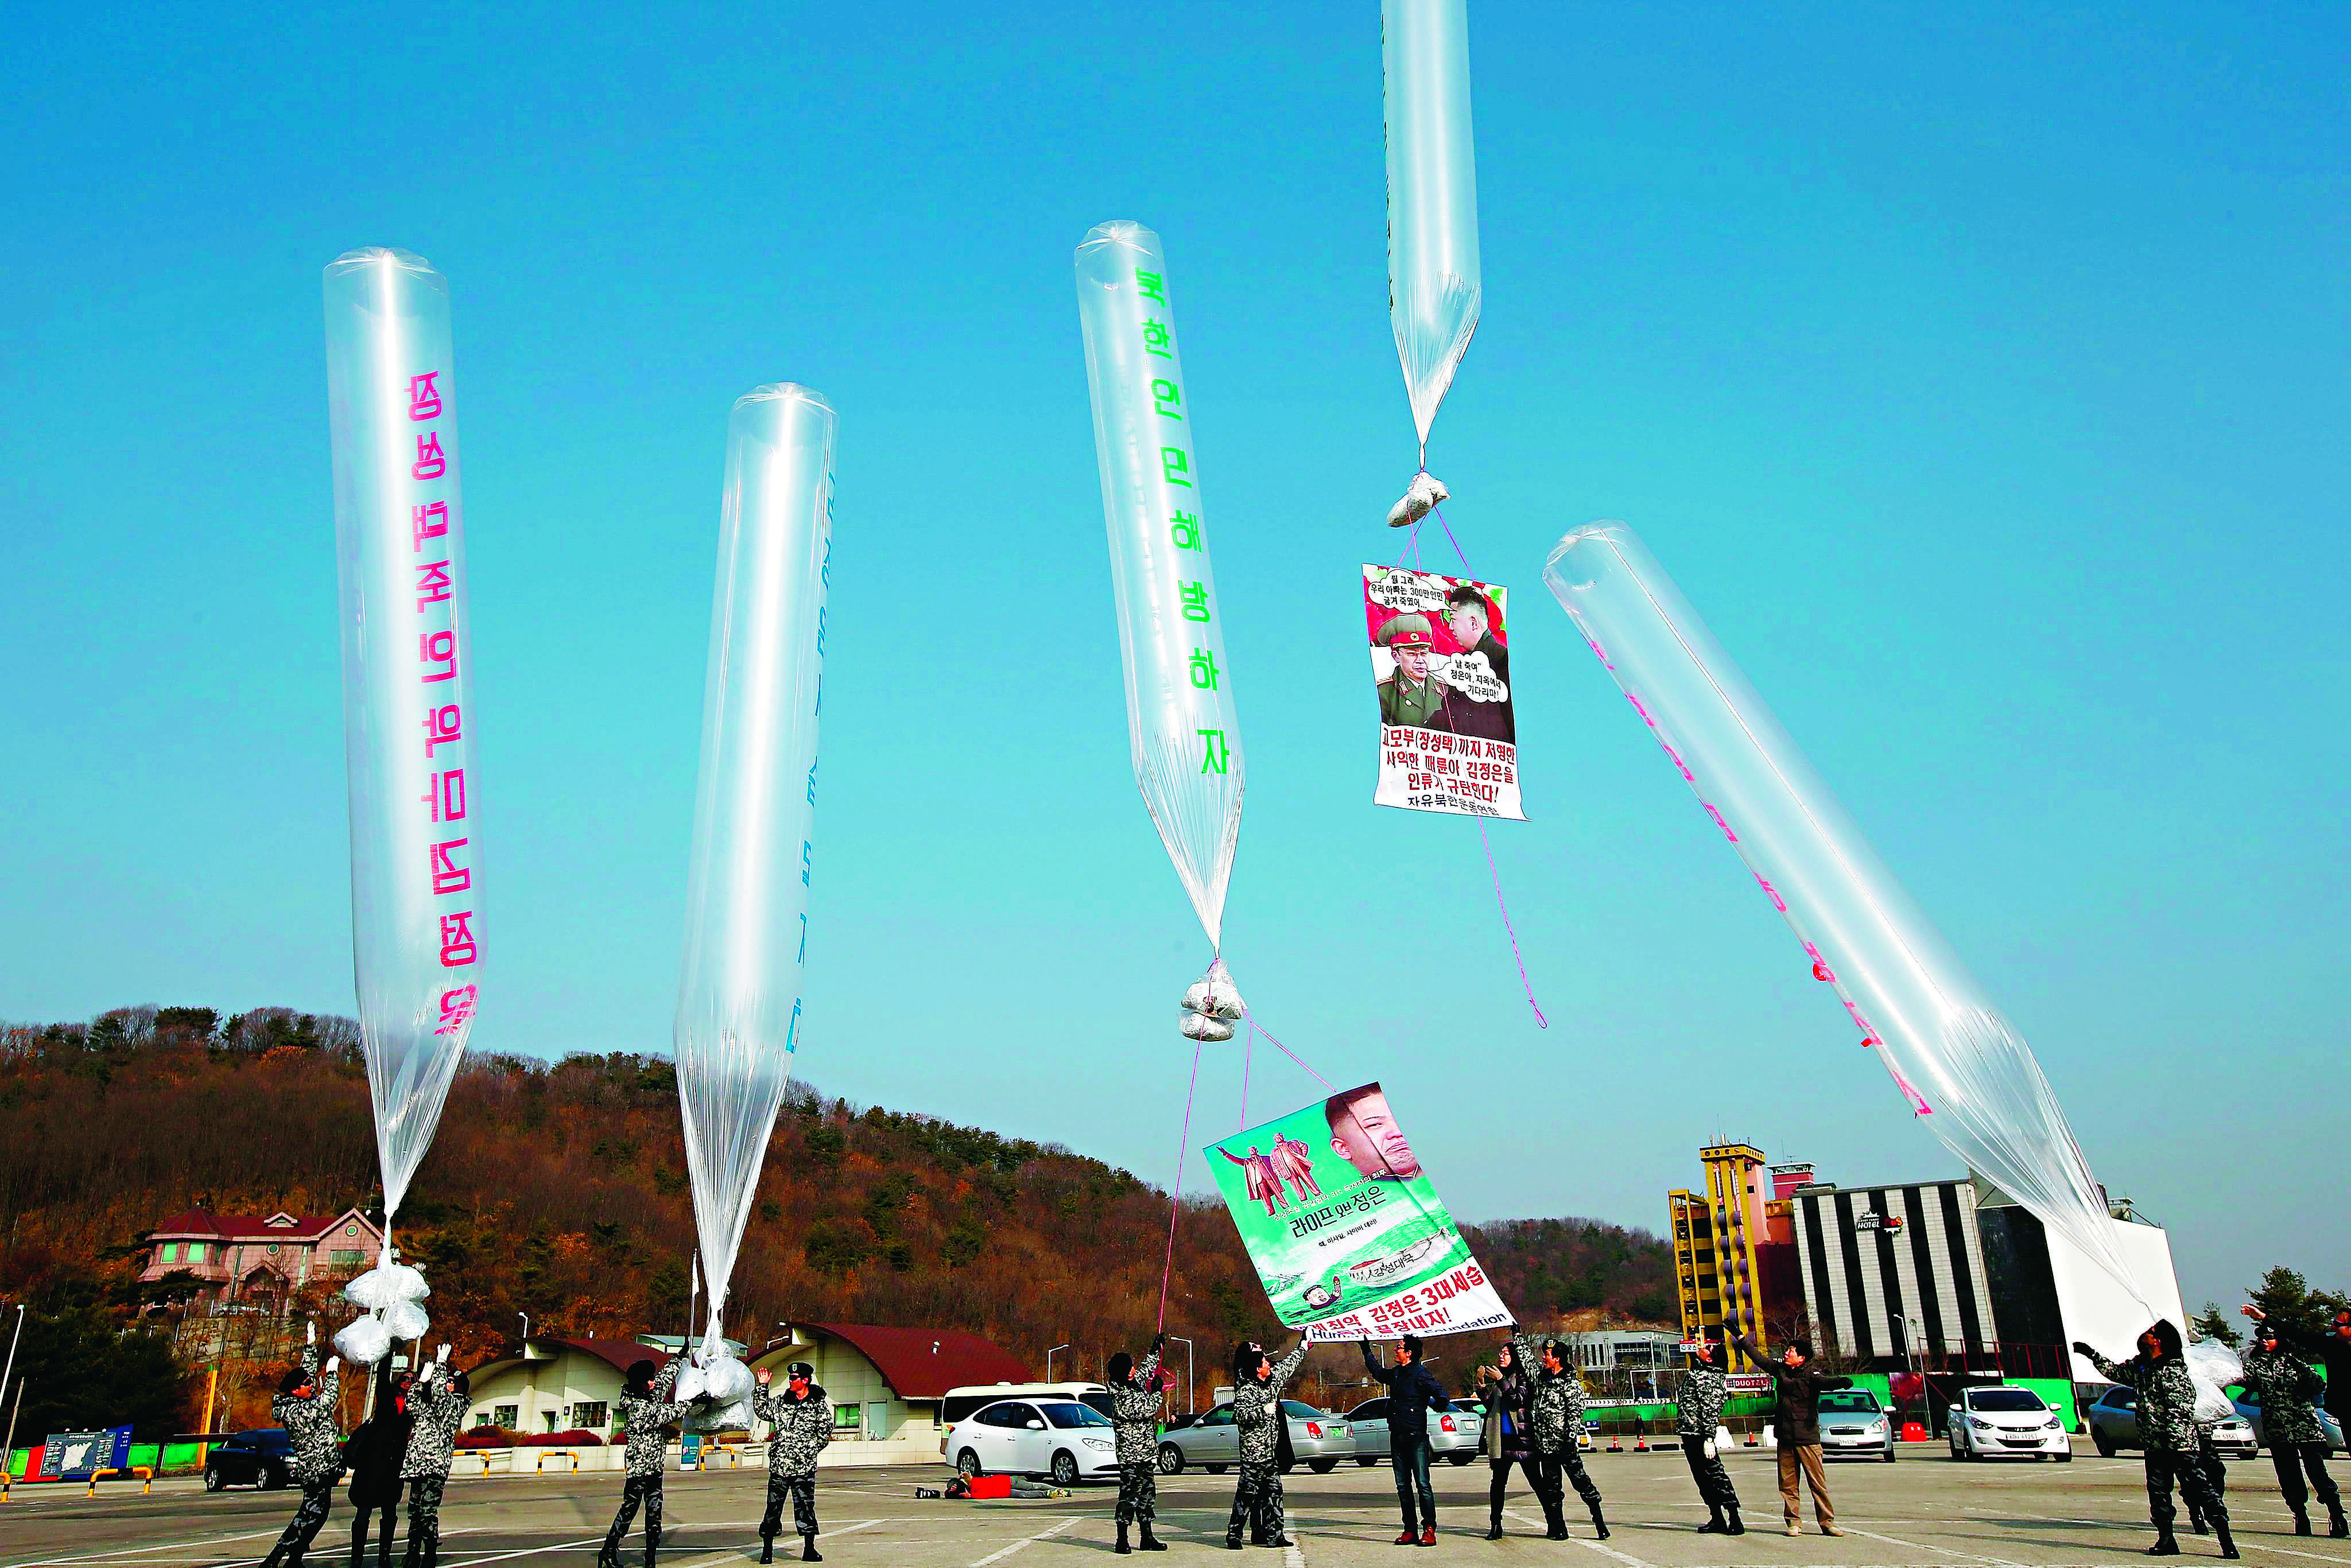 North Korean defectors, flies balloons carrying anti-North Korean government propaganda leaflets, along with US dollar notes and DVDs into North Korea, near the Demilitarized zone (DMZ) of Paju in Gyeonggi-do Province, South Korea. Photo: EPA